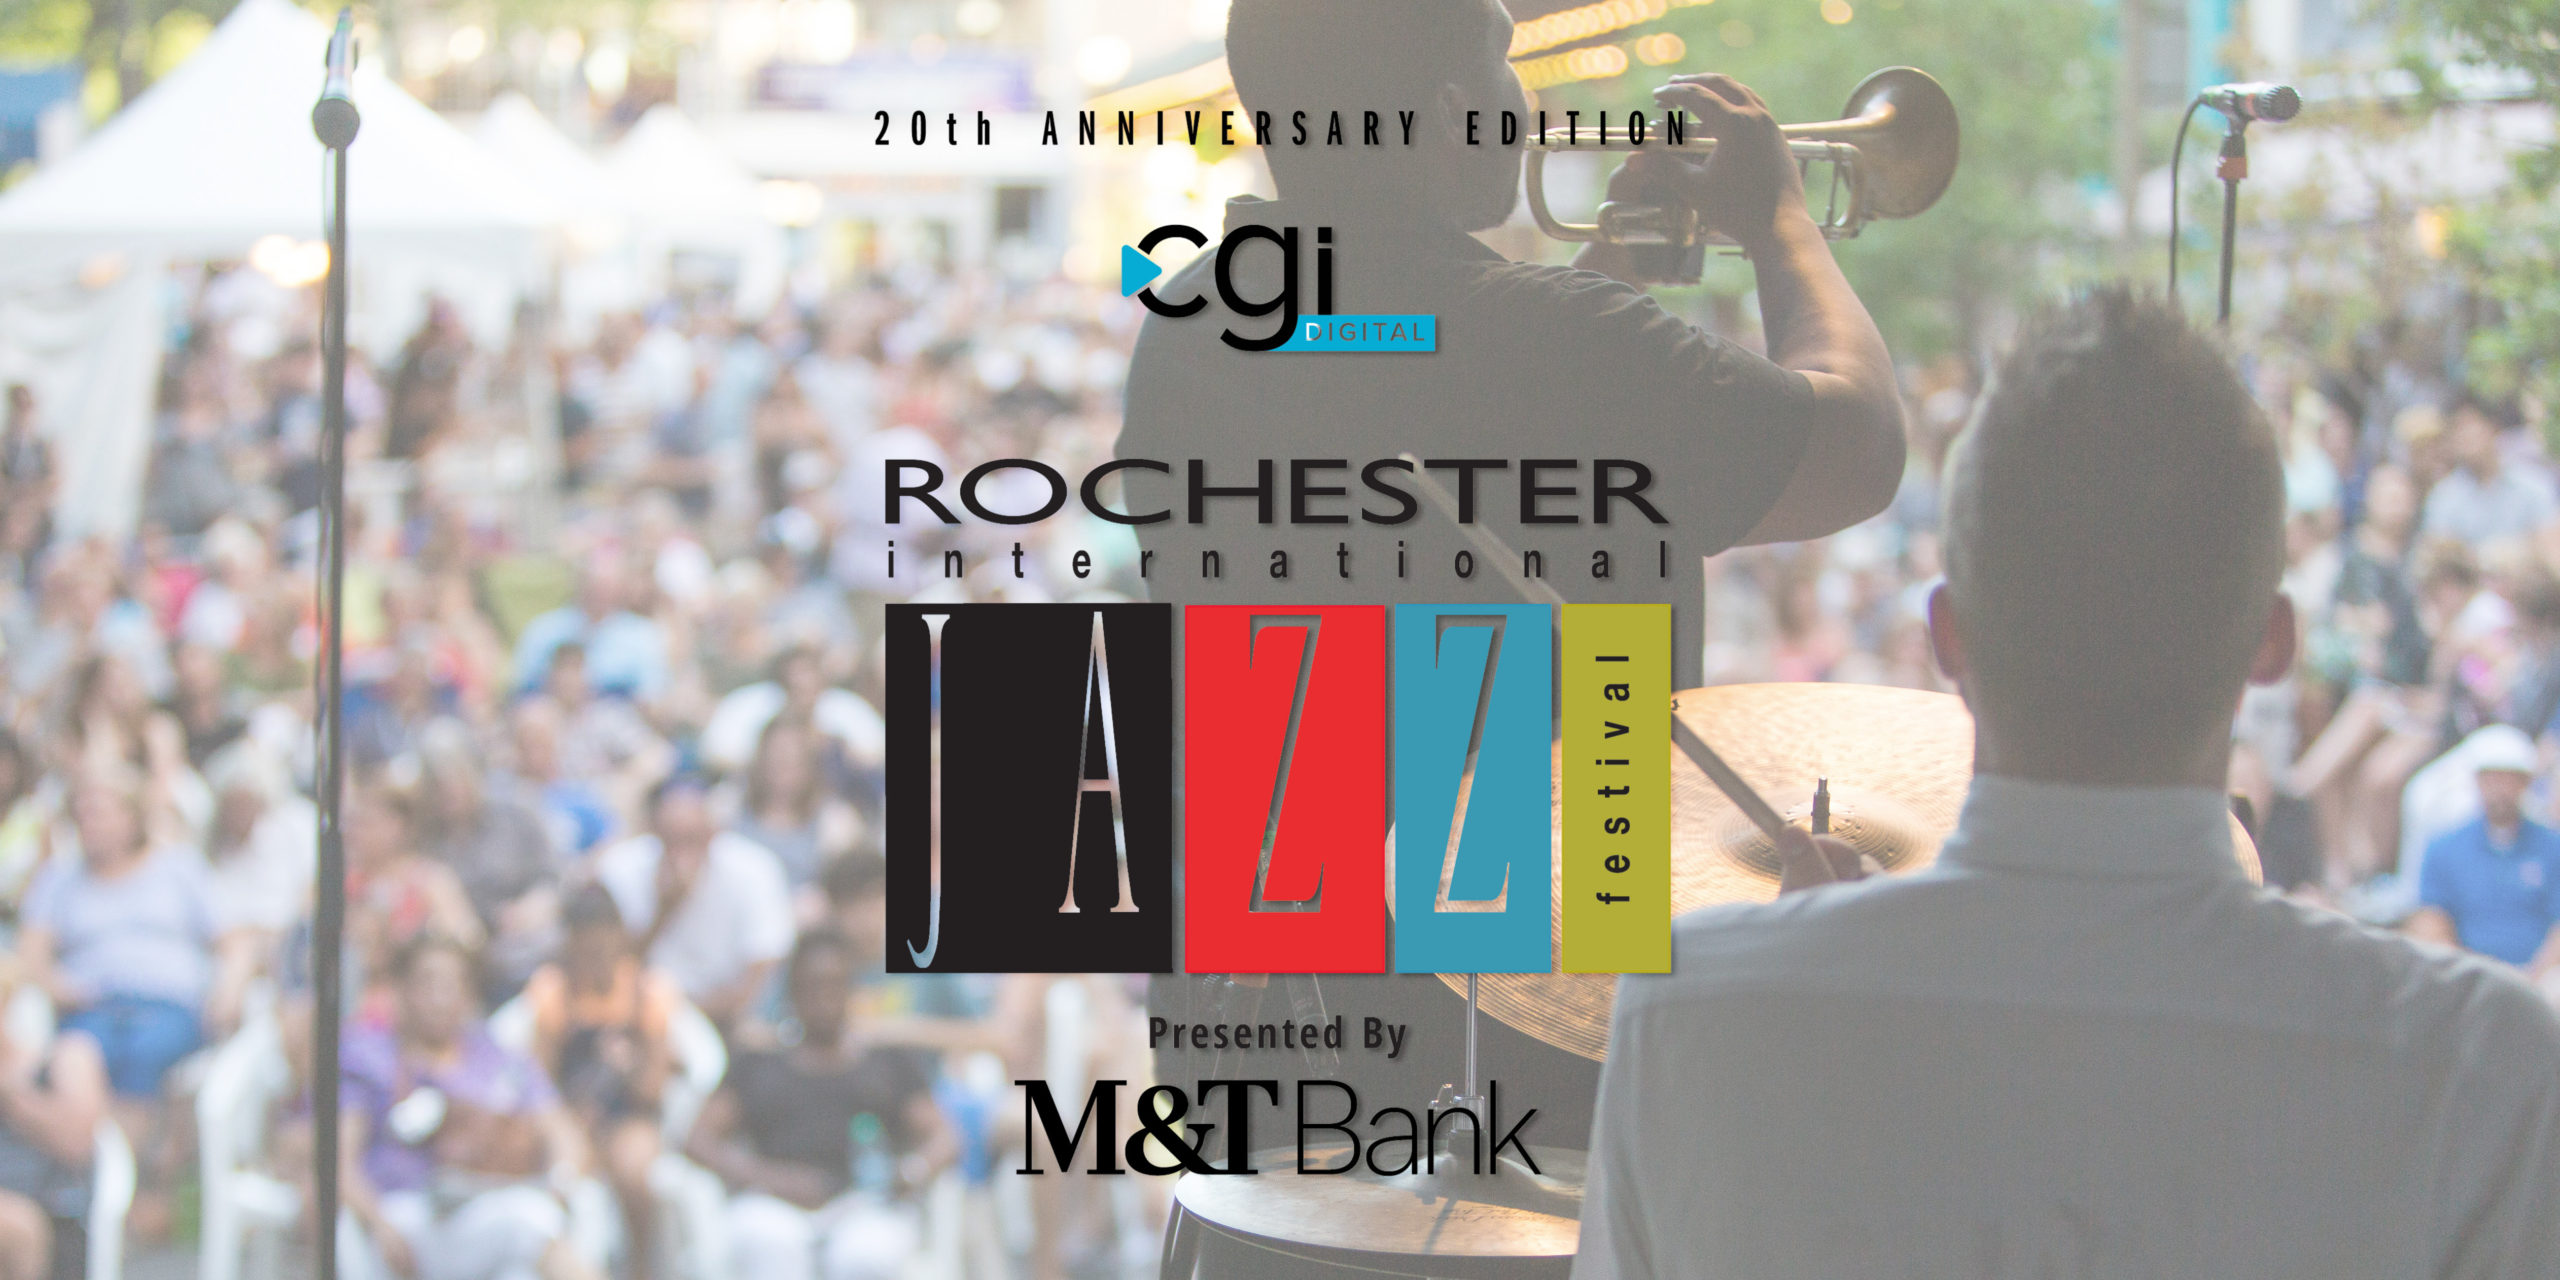 Rochester Jazz Fest: Free Shows and Iconic Guitars - A Music Lover's Delight! 12